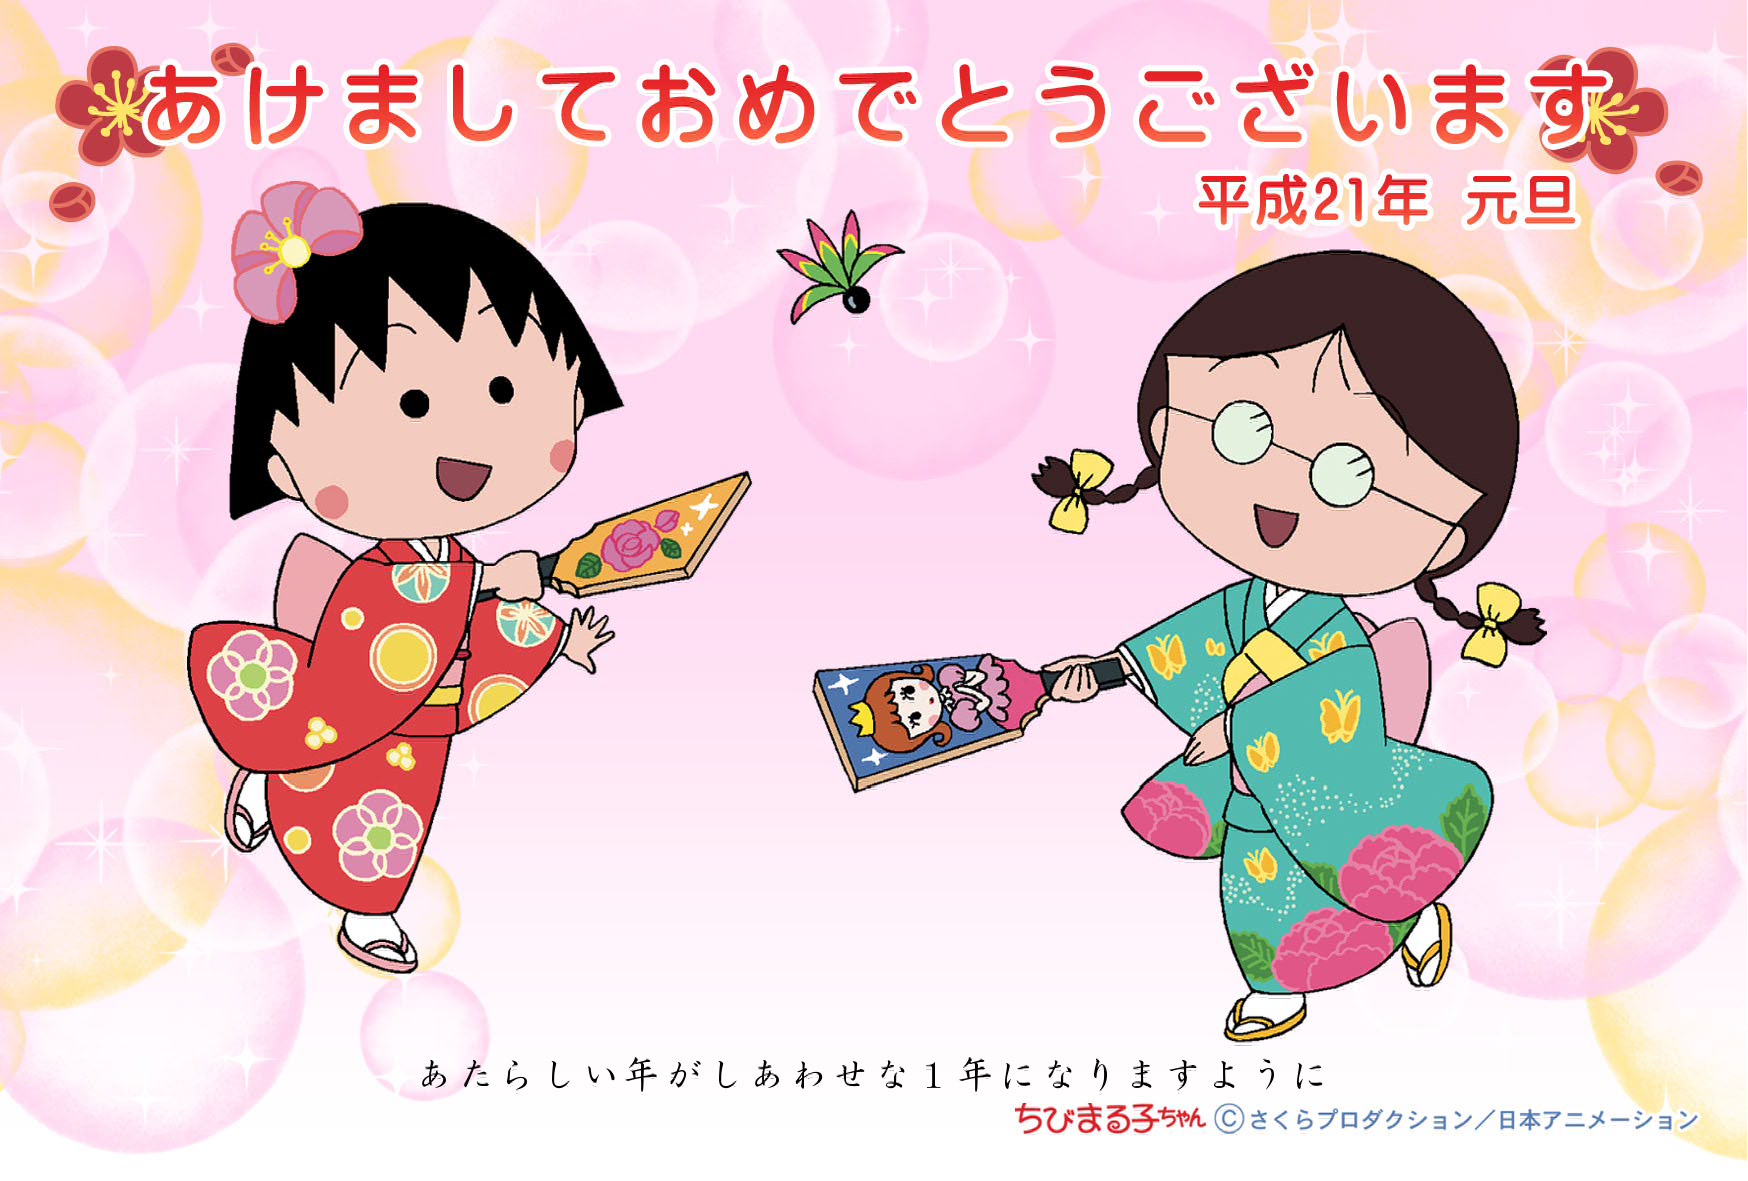 Pictures Gallery Of Chibi Maruko Chan Motionkids Tv Fun For Kids